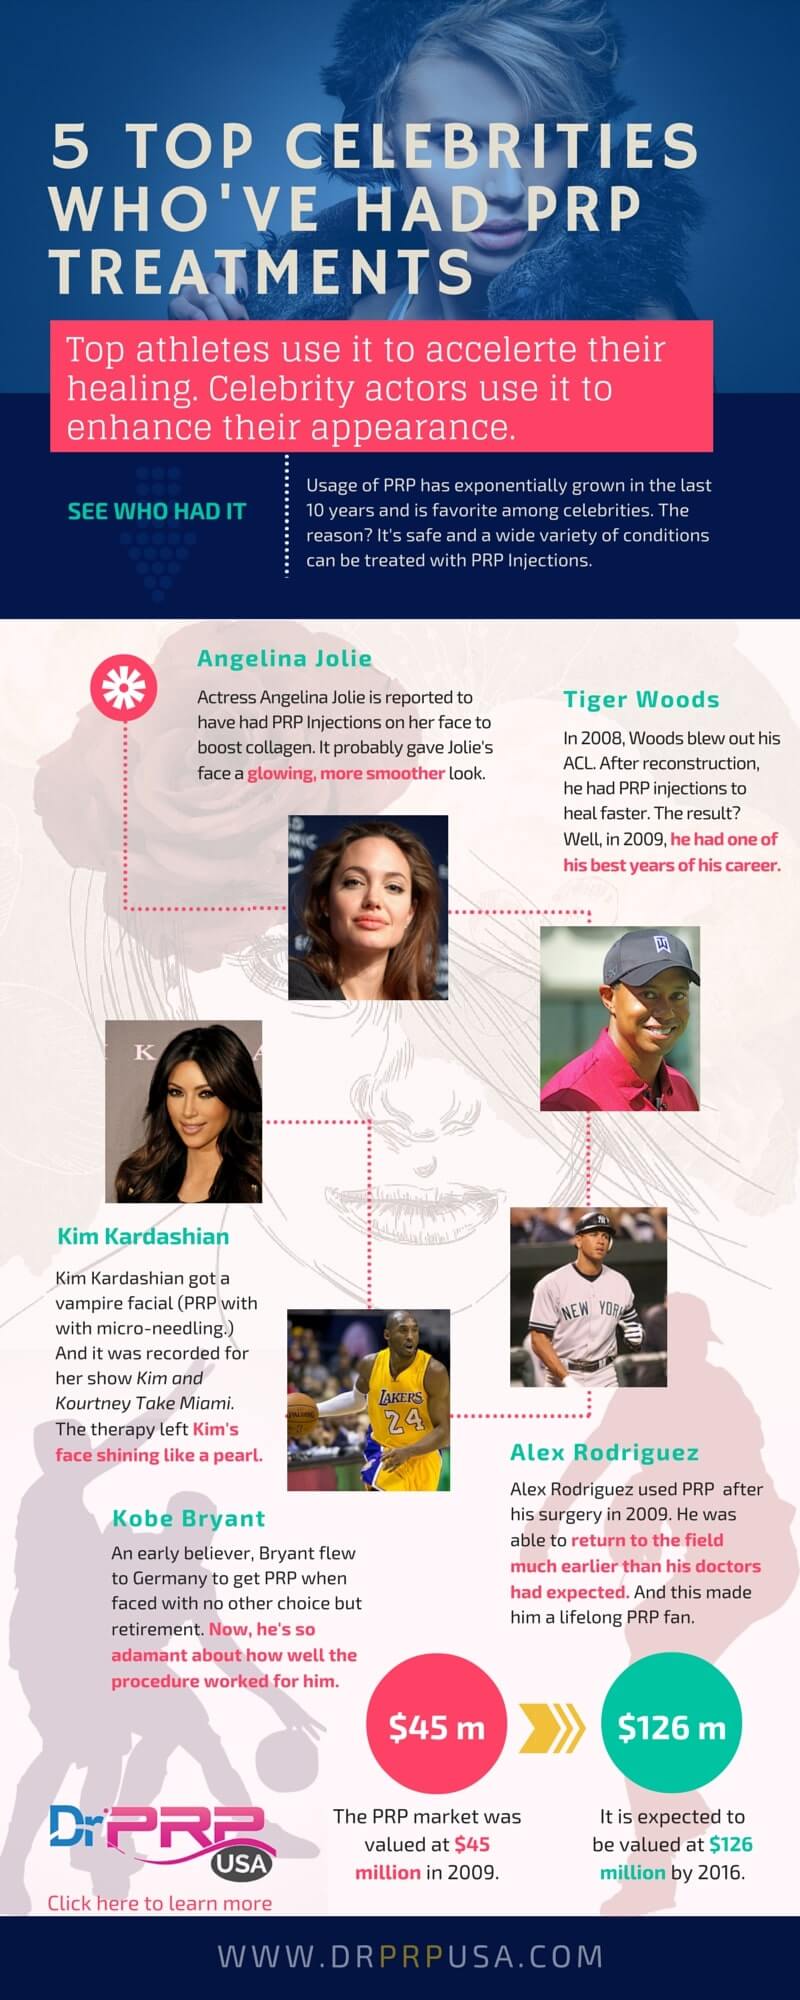 5 Top Celebrities Who’ve Had PRP Treatments Infographic